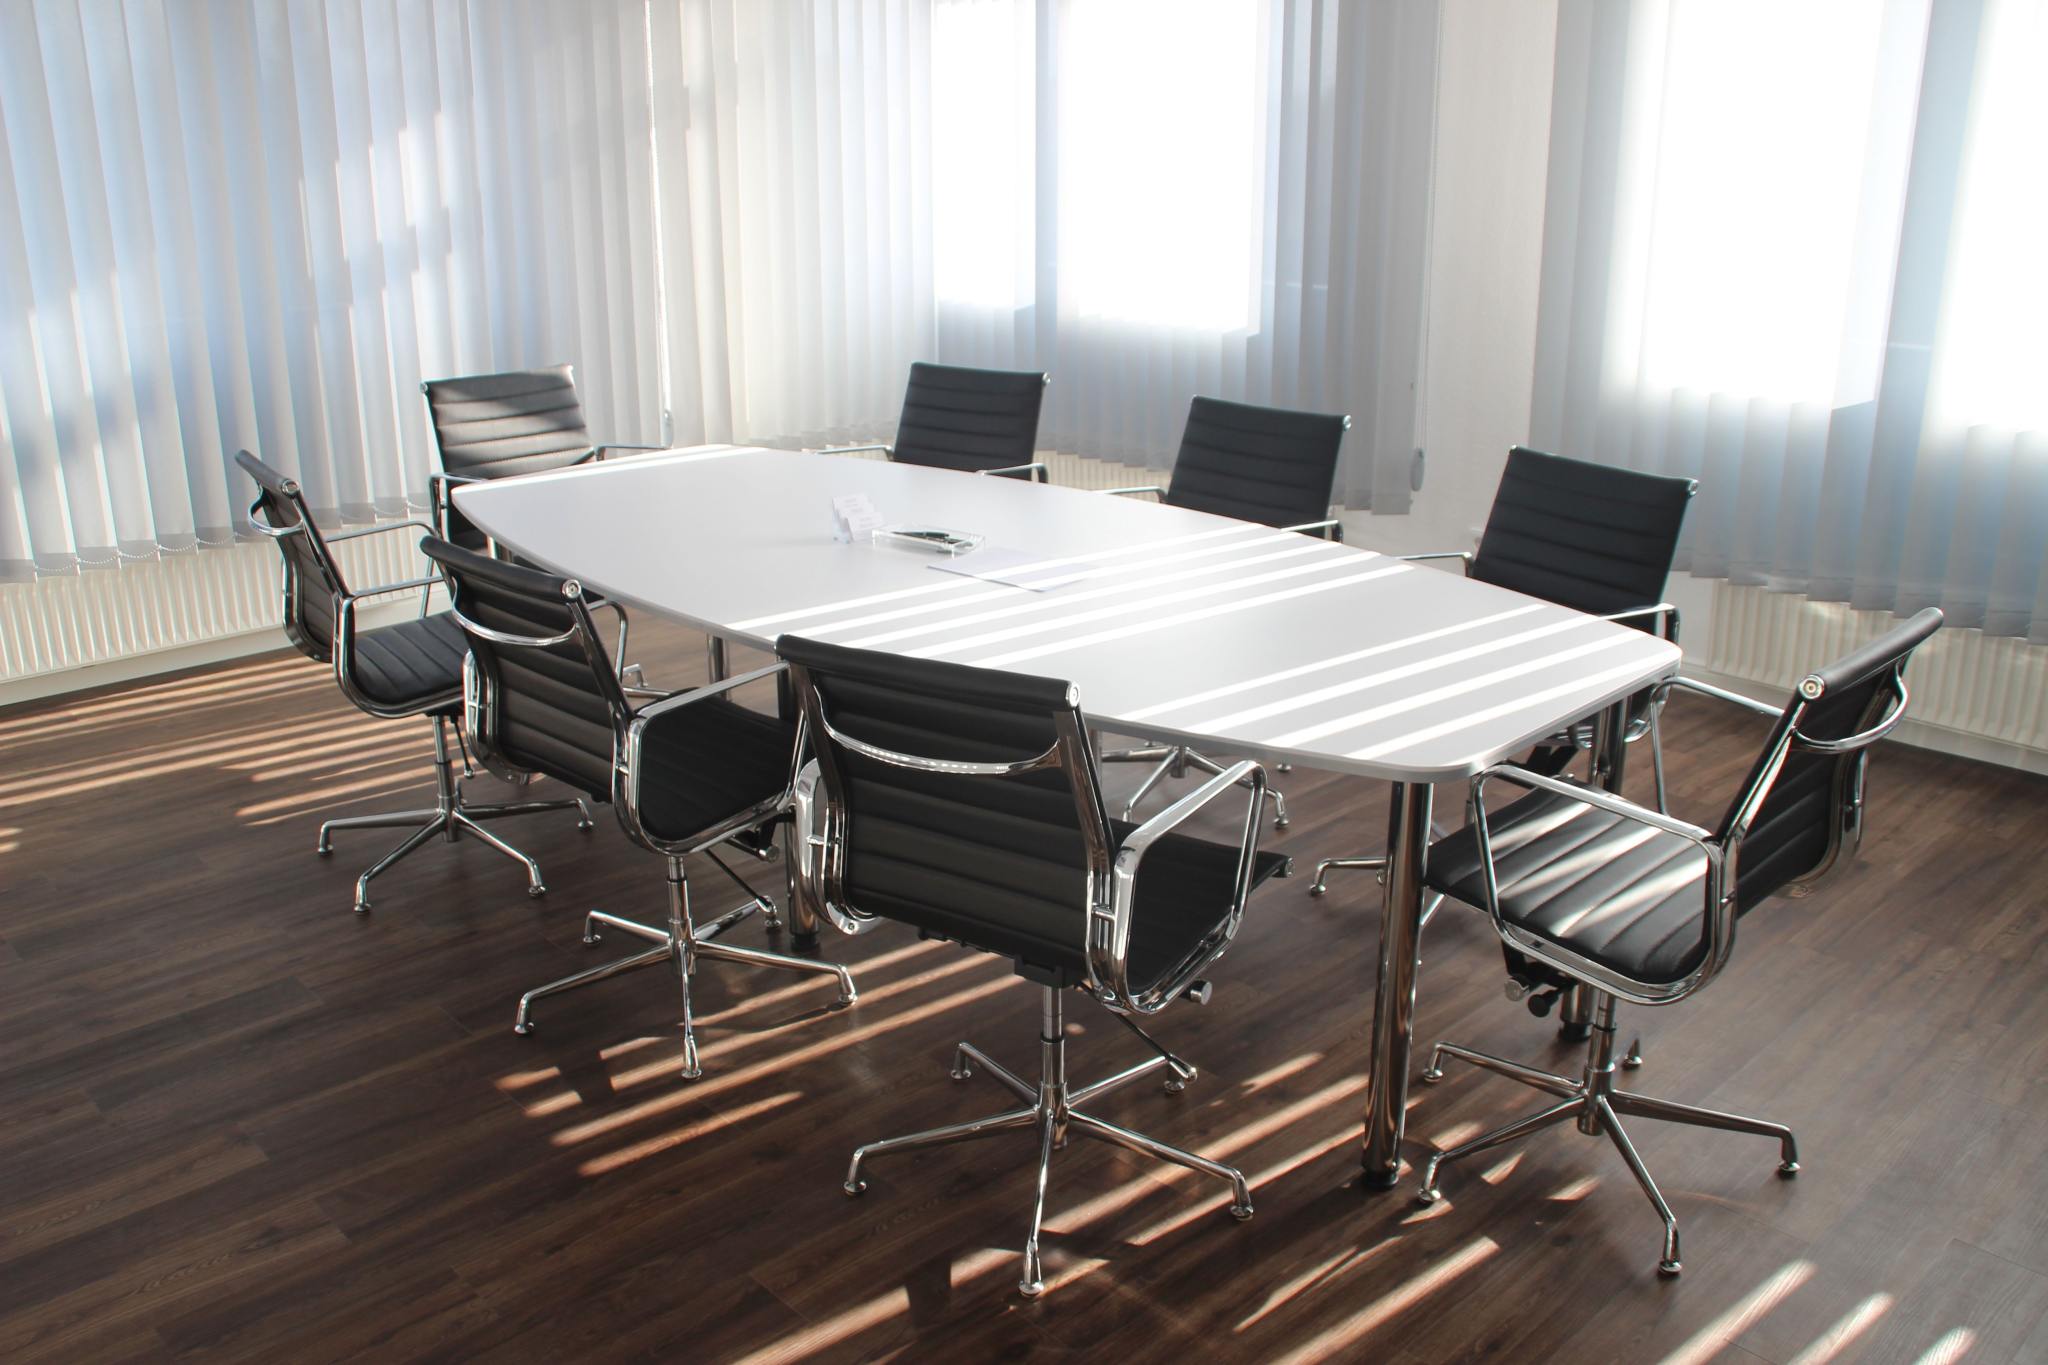 Meeting room with empty chairs